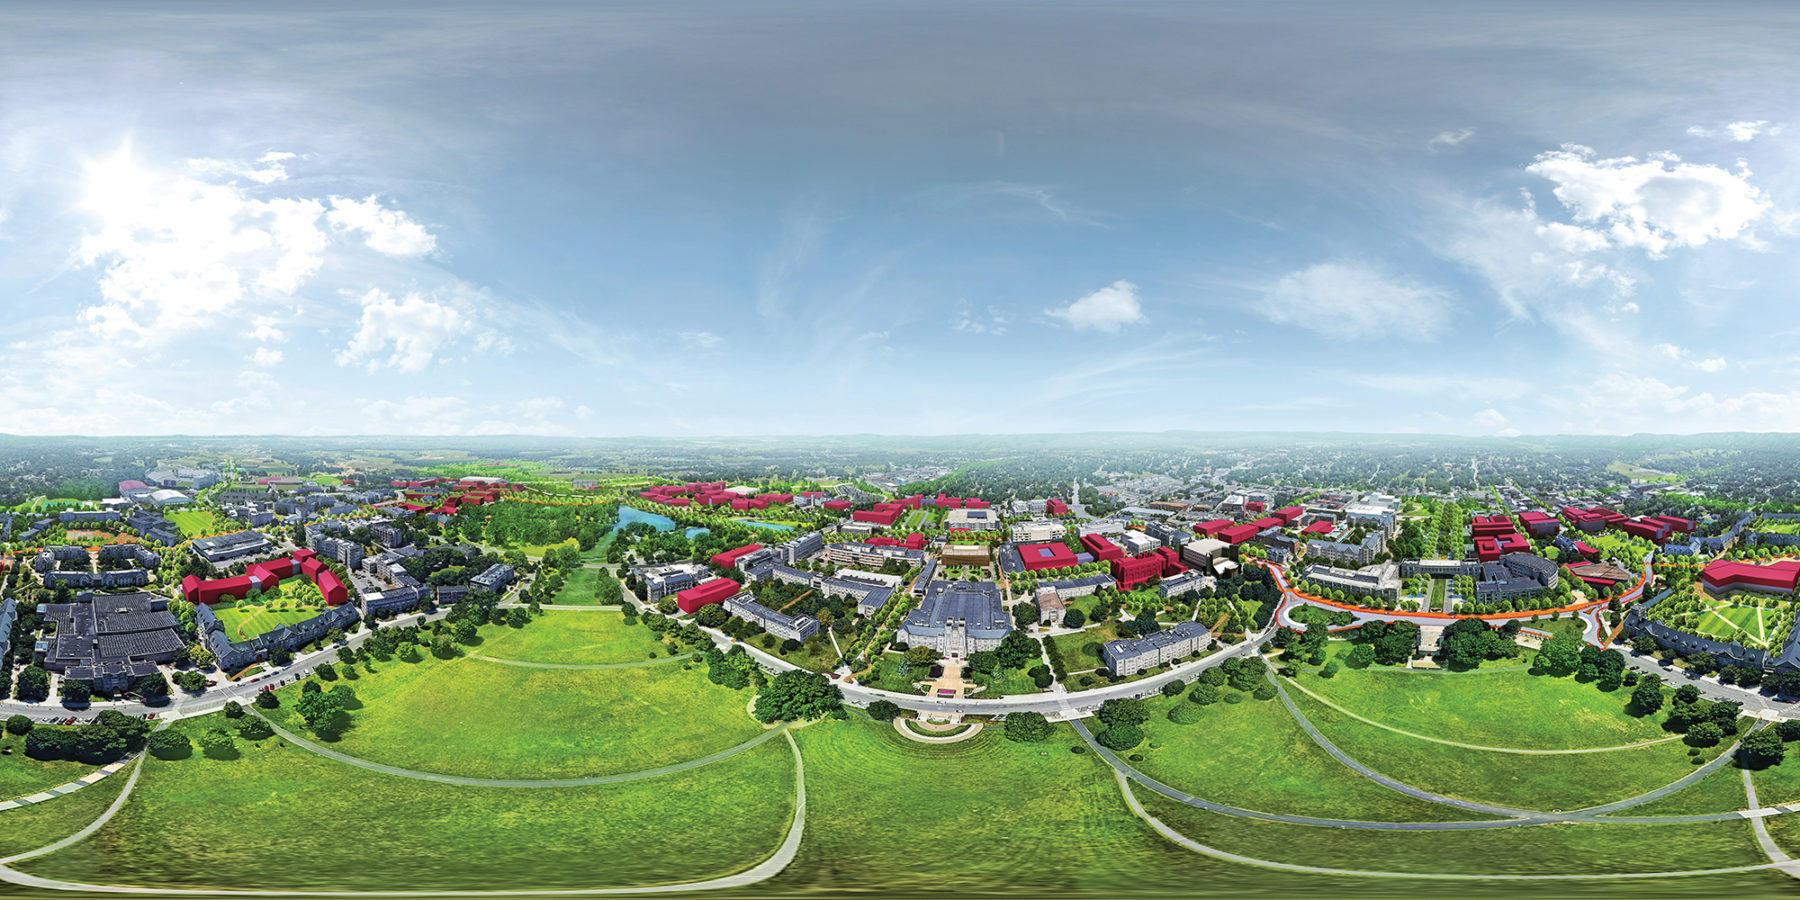 Slightly distorted two dimensional image of campus master plan